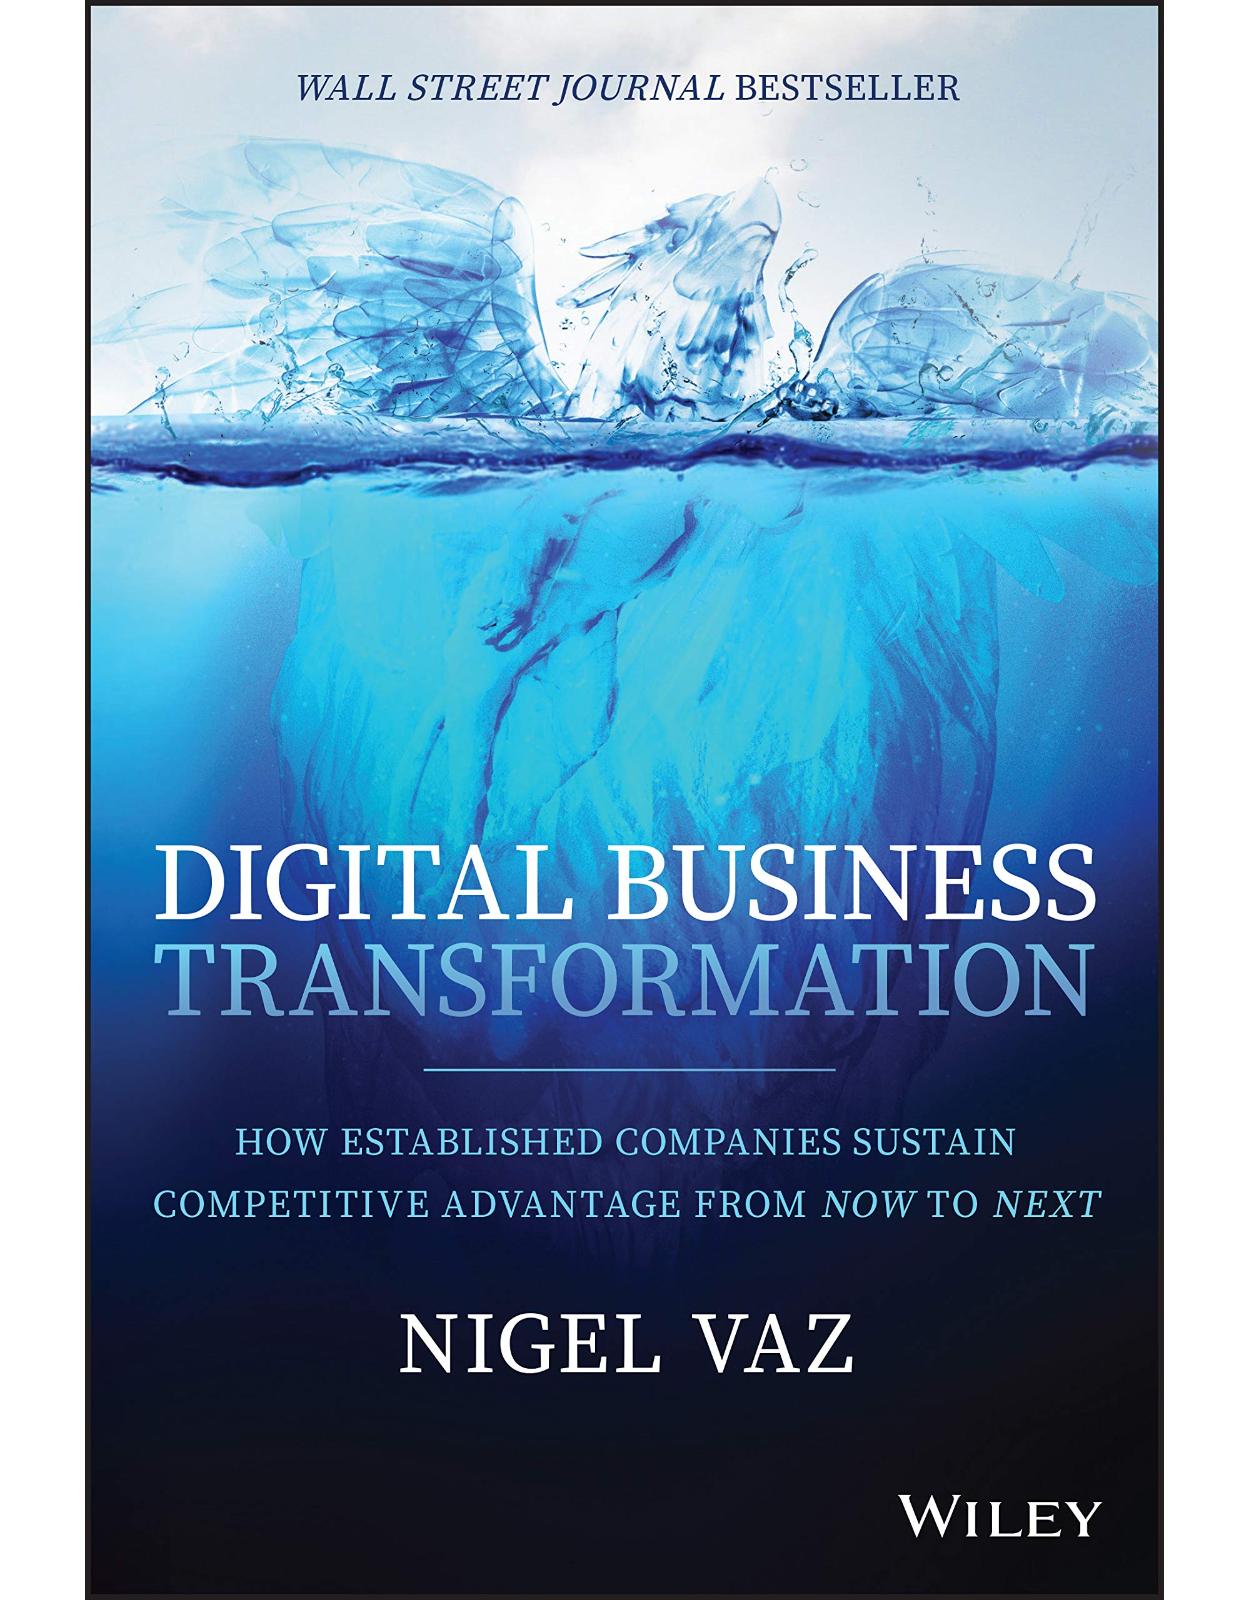 Digital Business Transformation: How Established Companies Sustain Competitive Advantage From Now to Next